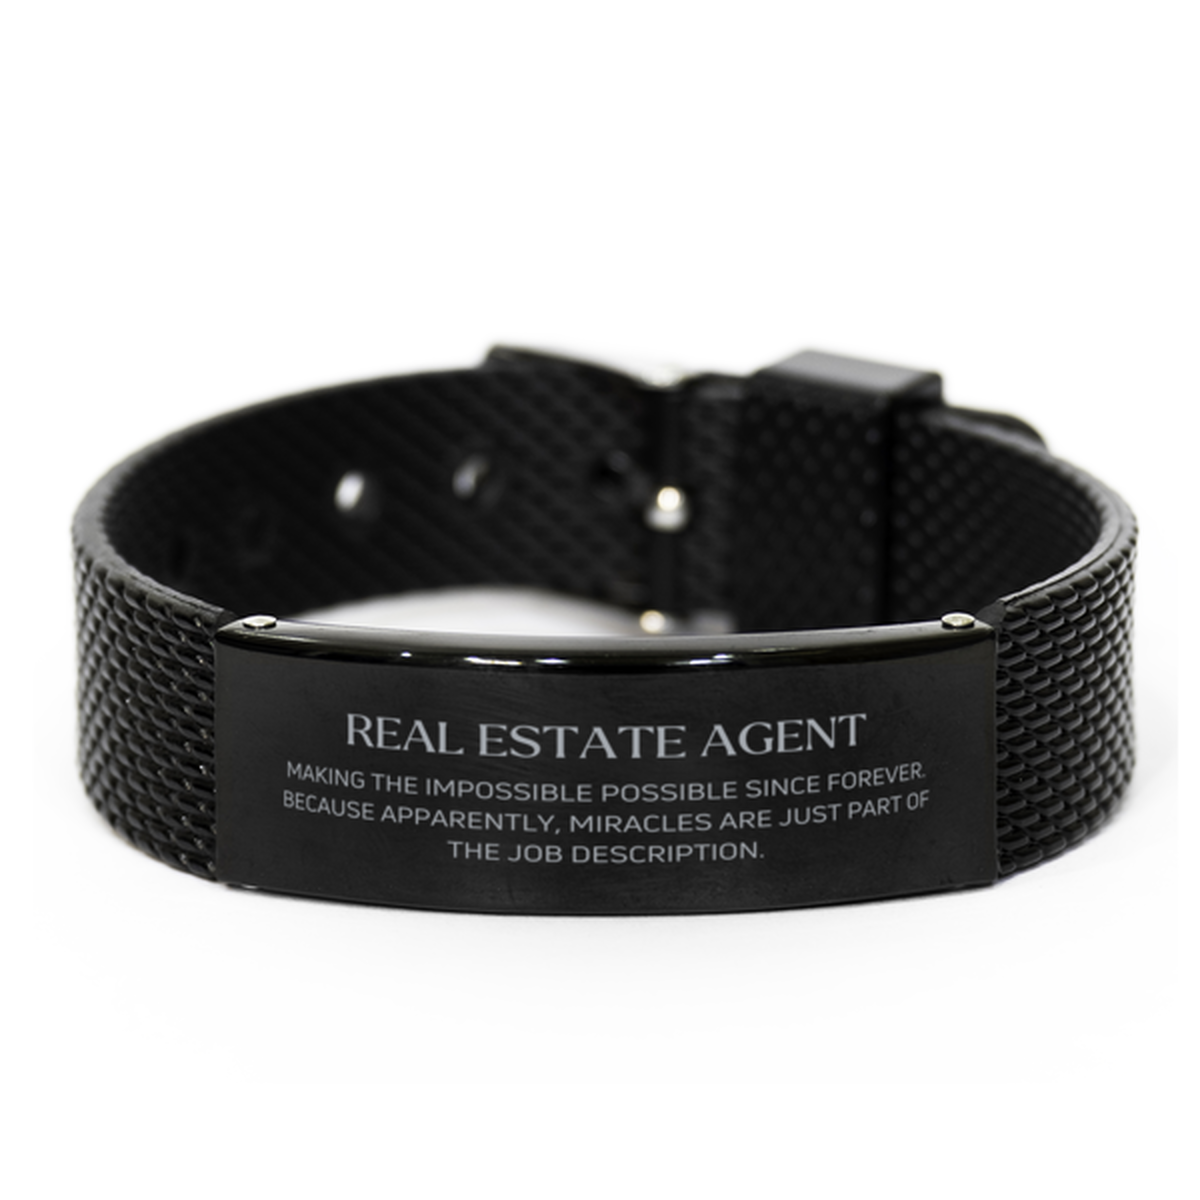 Funny Real Estate Agent Gifts, Miracles are just part of the job description, Inspirational Birthday Black Shark Mesh Bracelet For Real Estate Agent, Men, Women, Coworkers, Friends, Boss